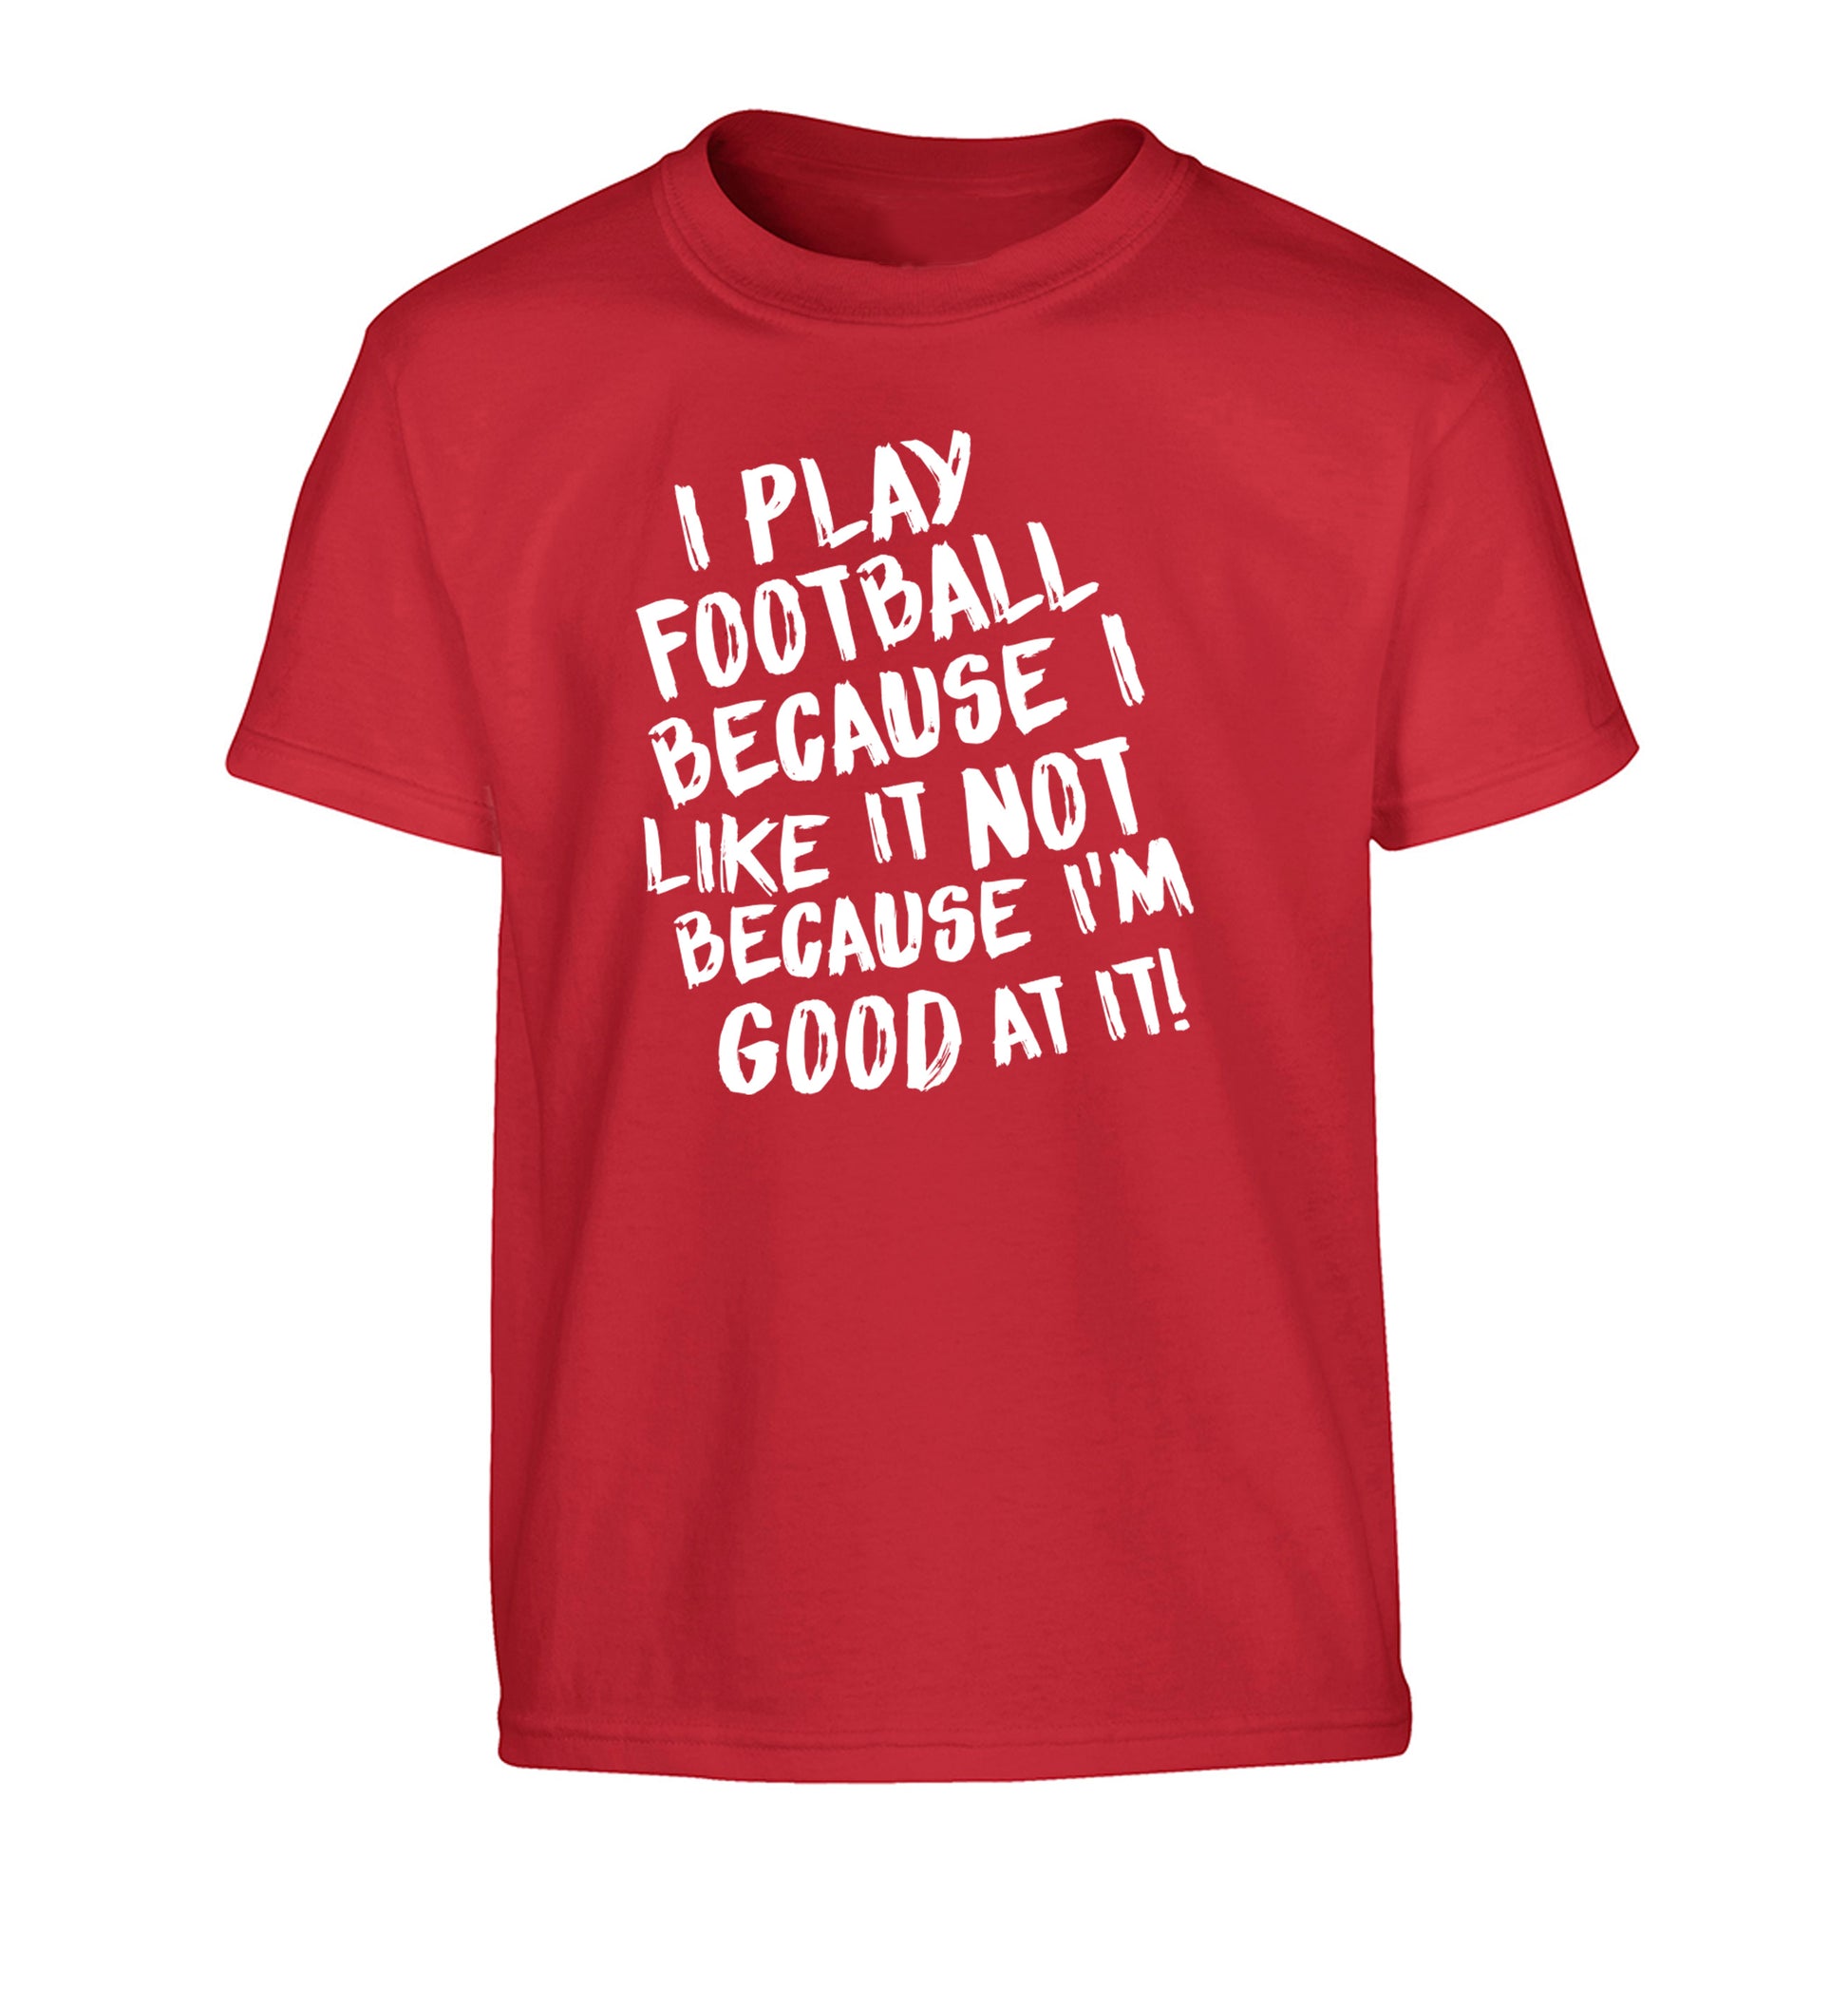 I play football because I like it not because I'm good at it Children's red Tshirt 12-14 Years